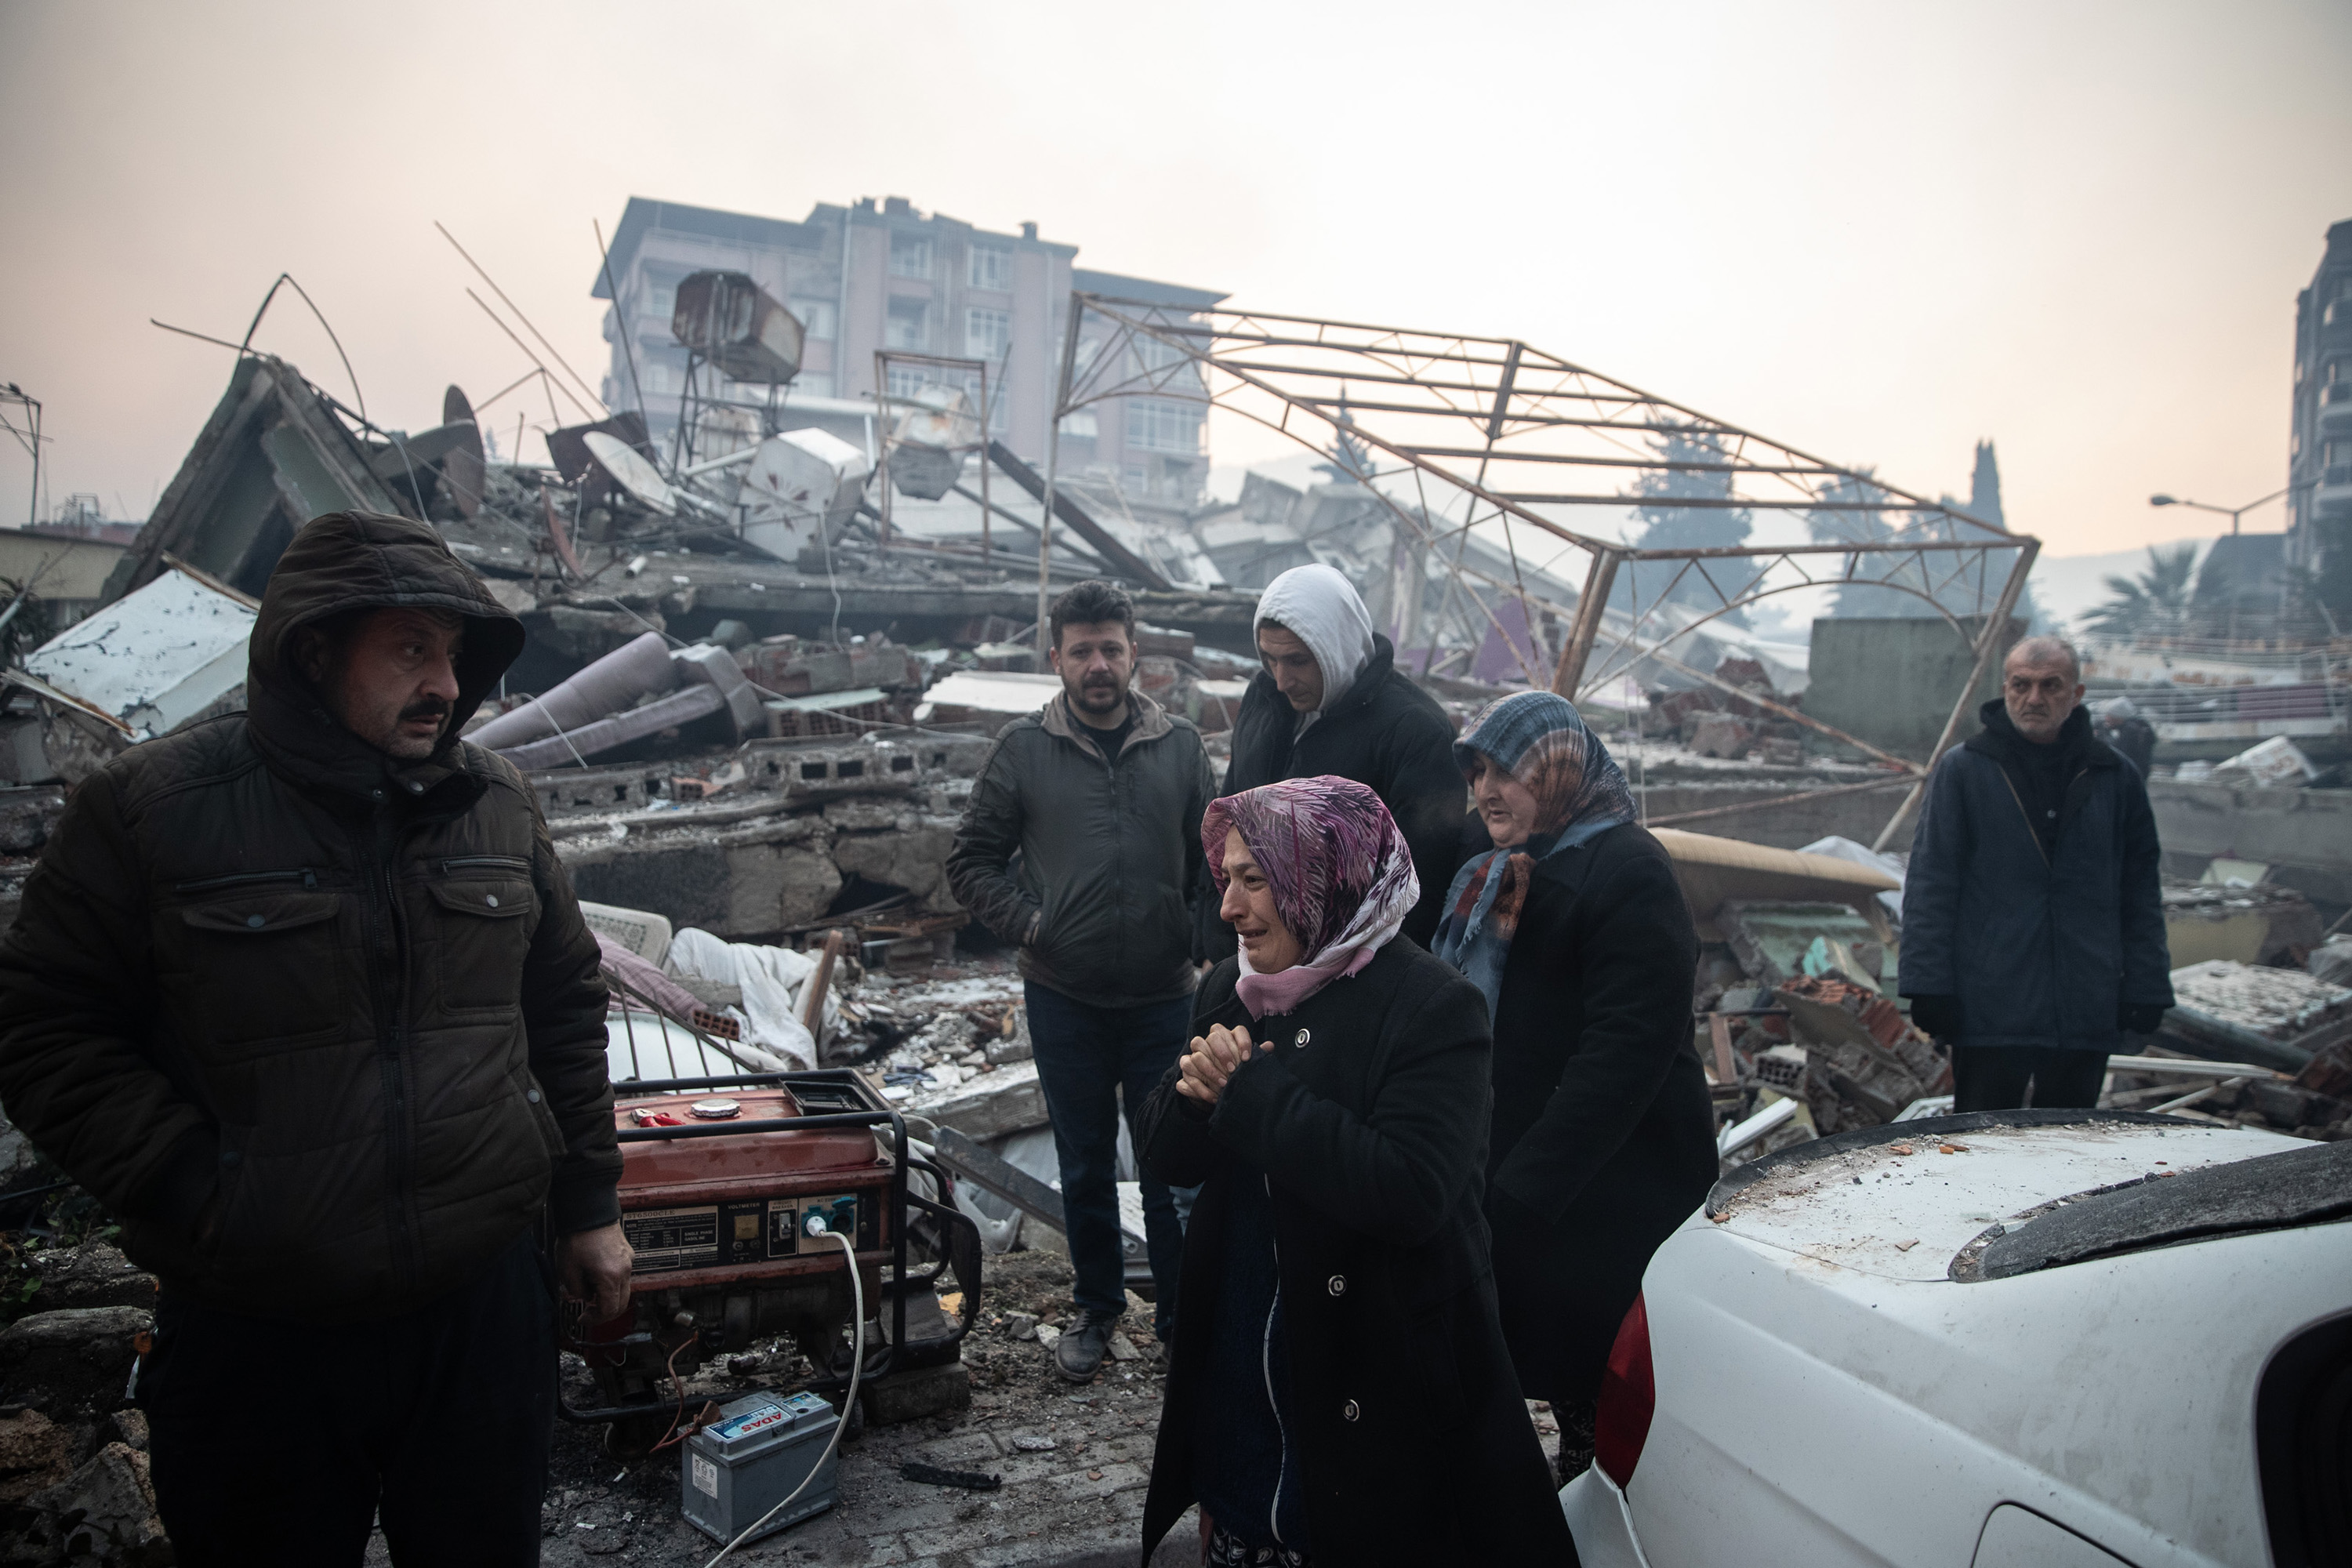 People wait for news of their loved ones, believed to be trapped under a collapsed building&nbsp;in Hatay, Turkey, on Feb. 7.&nbsp;Erdogan plans to visit the worst-hit cities of Kahramanmaras and Hatay Wednesday.